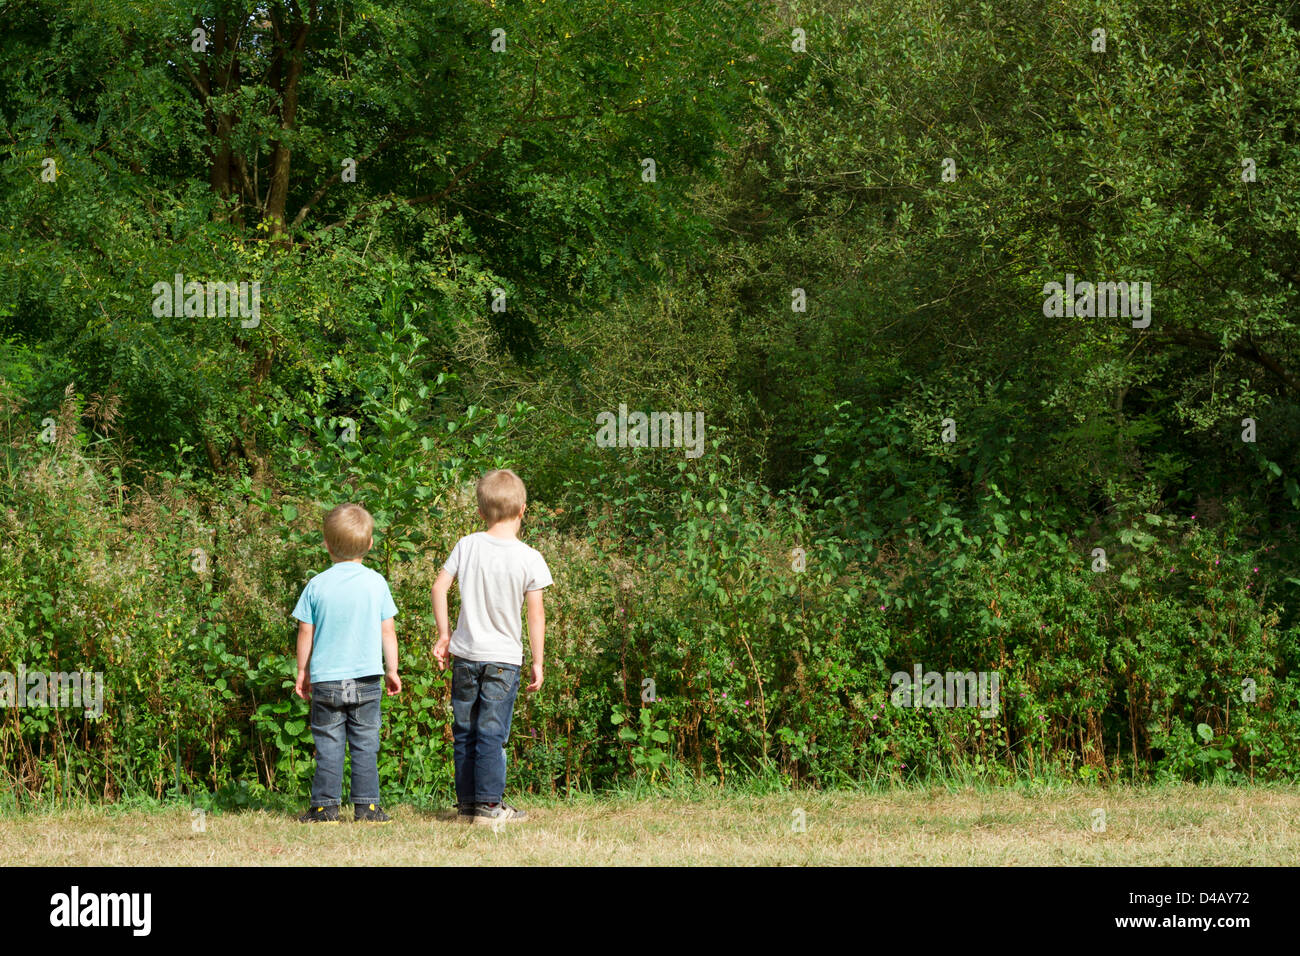 Two boys (4-7) looking at dense forest. Stock Photo